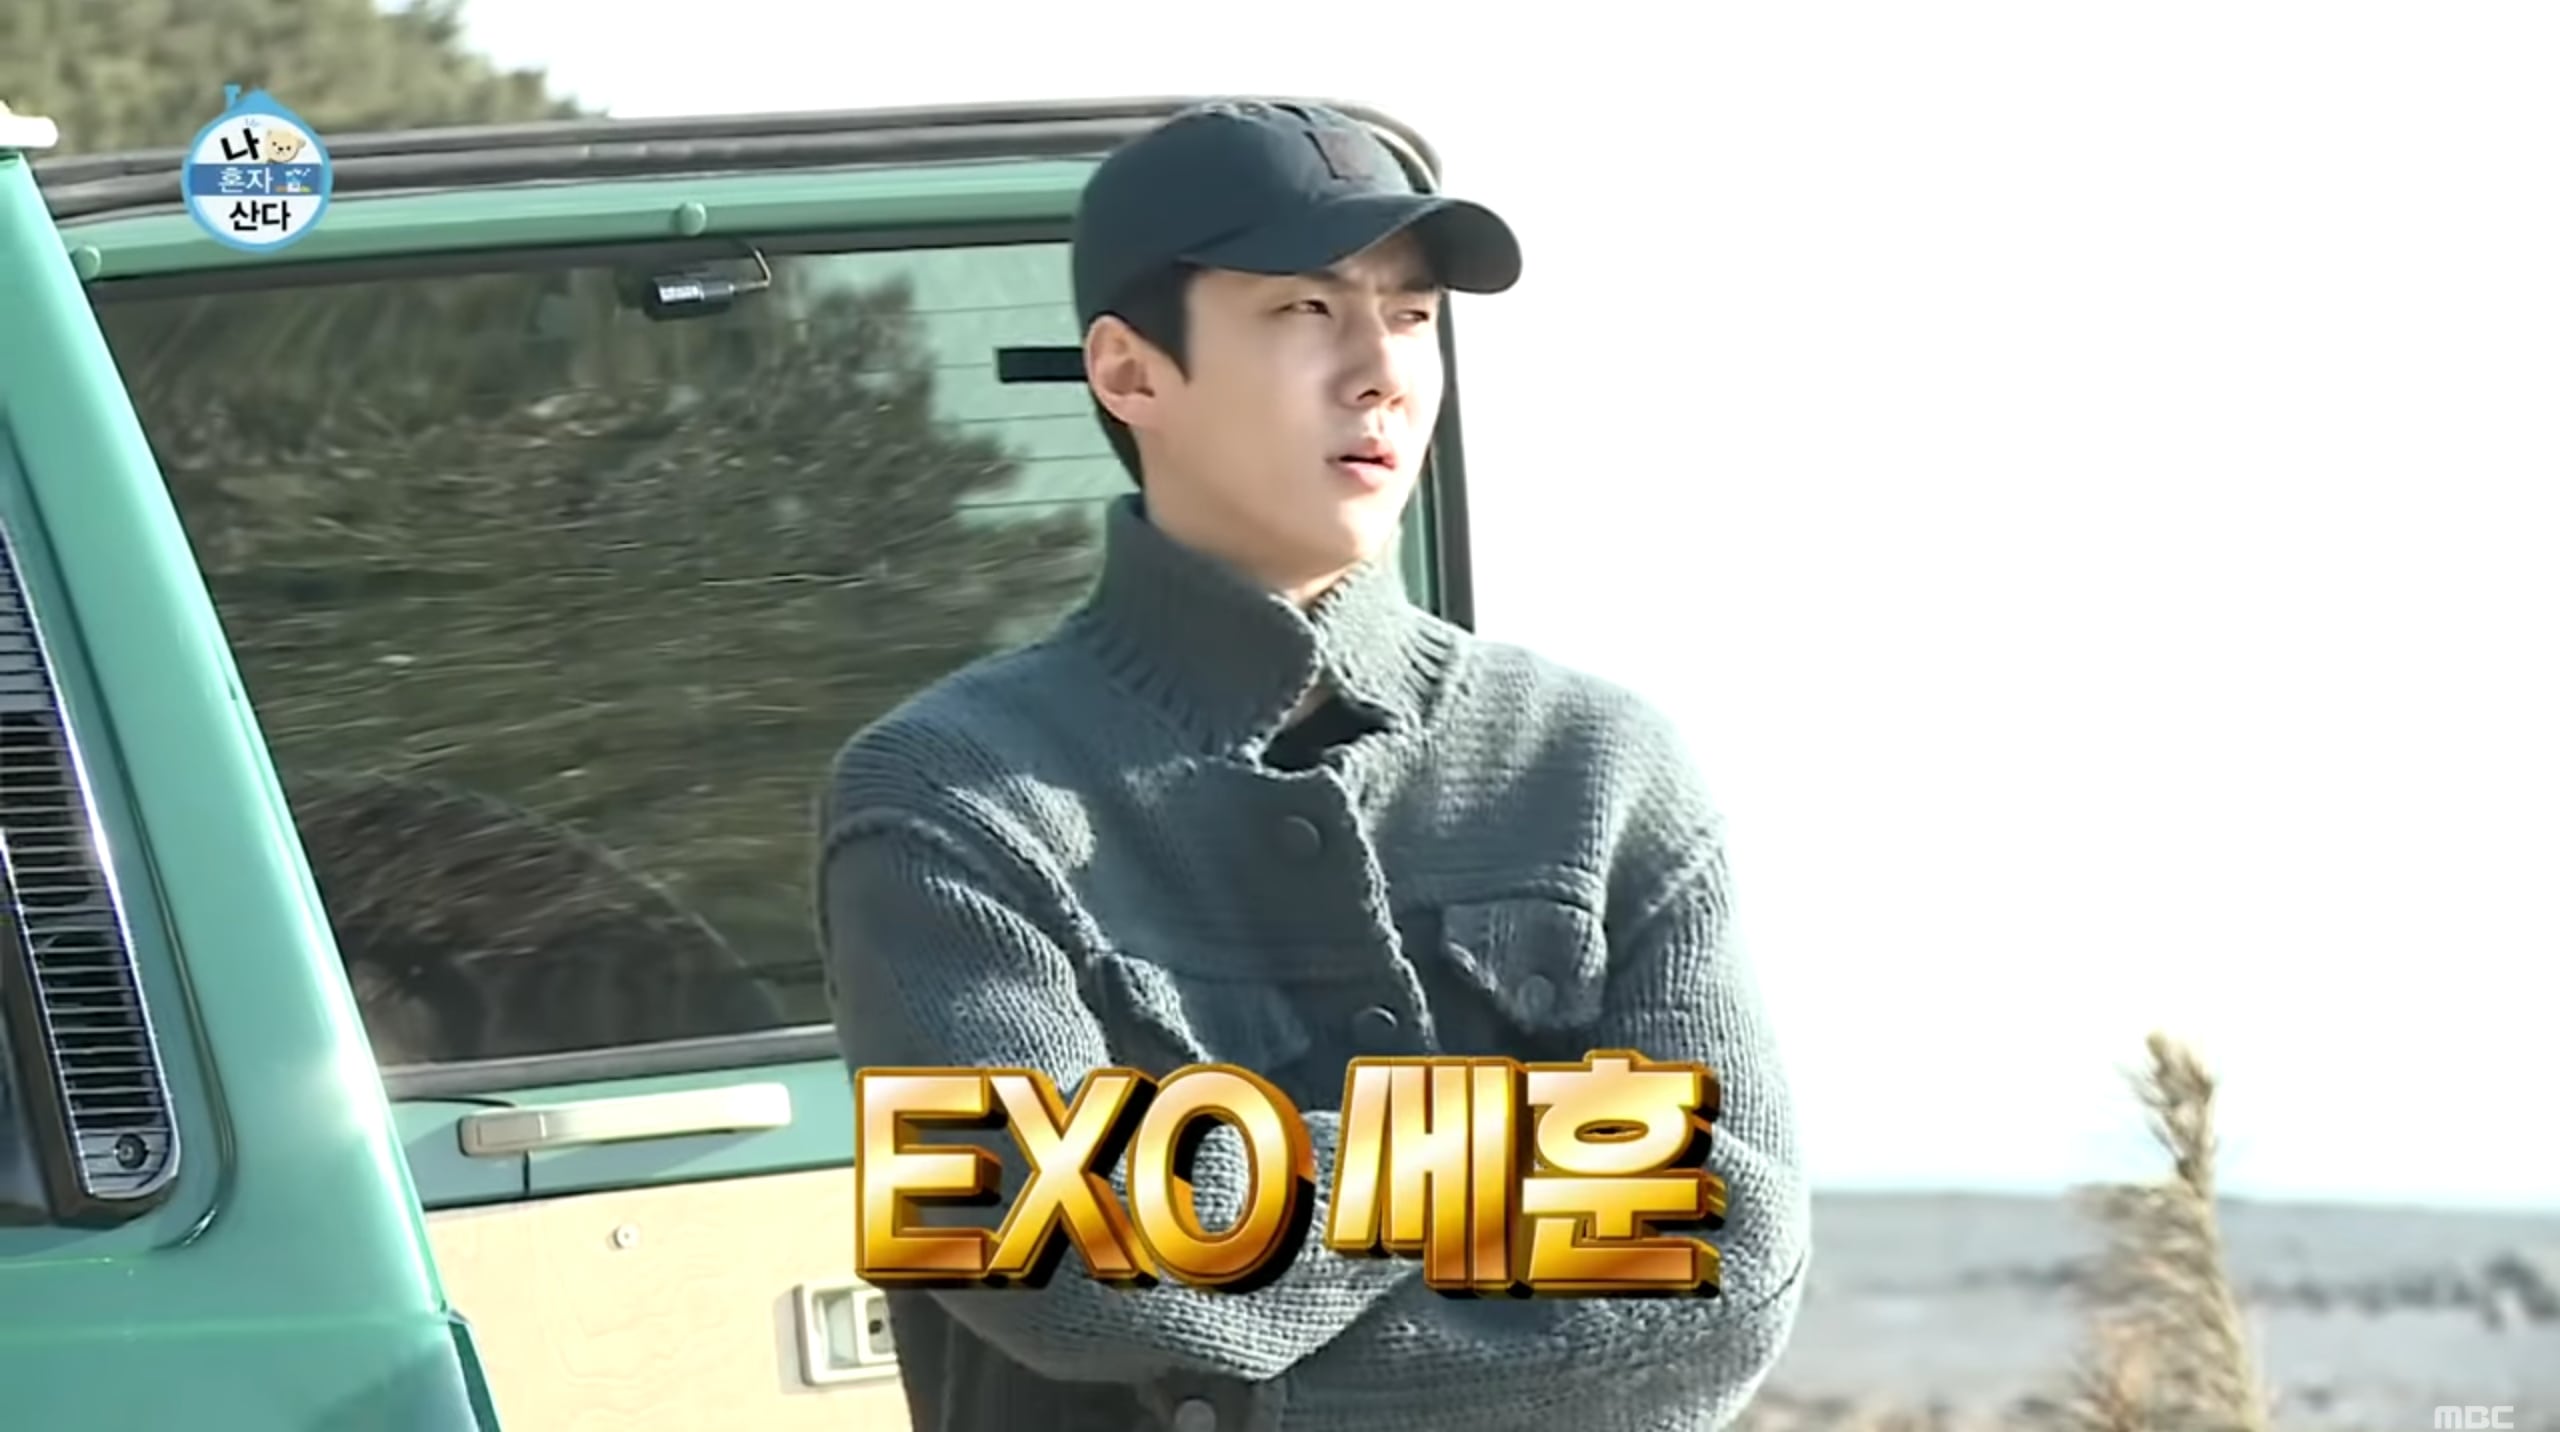 ahn-bo-hyun-takes-exo-sehun-camping-and-reveals-his-home-on-i-live-alone-4